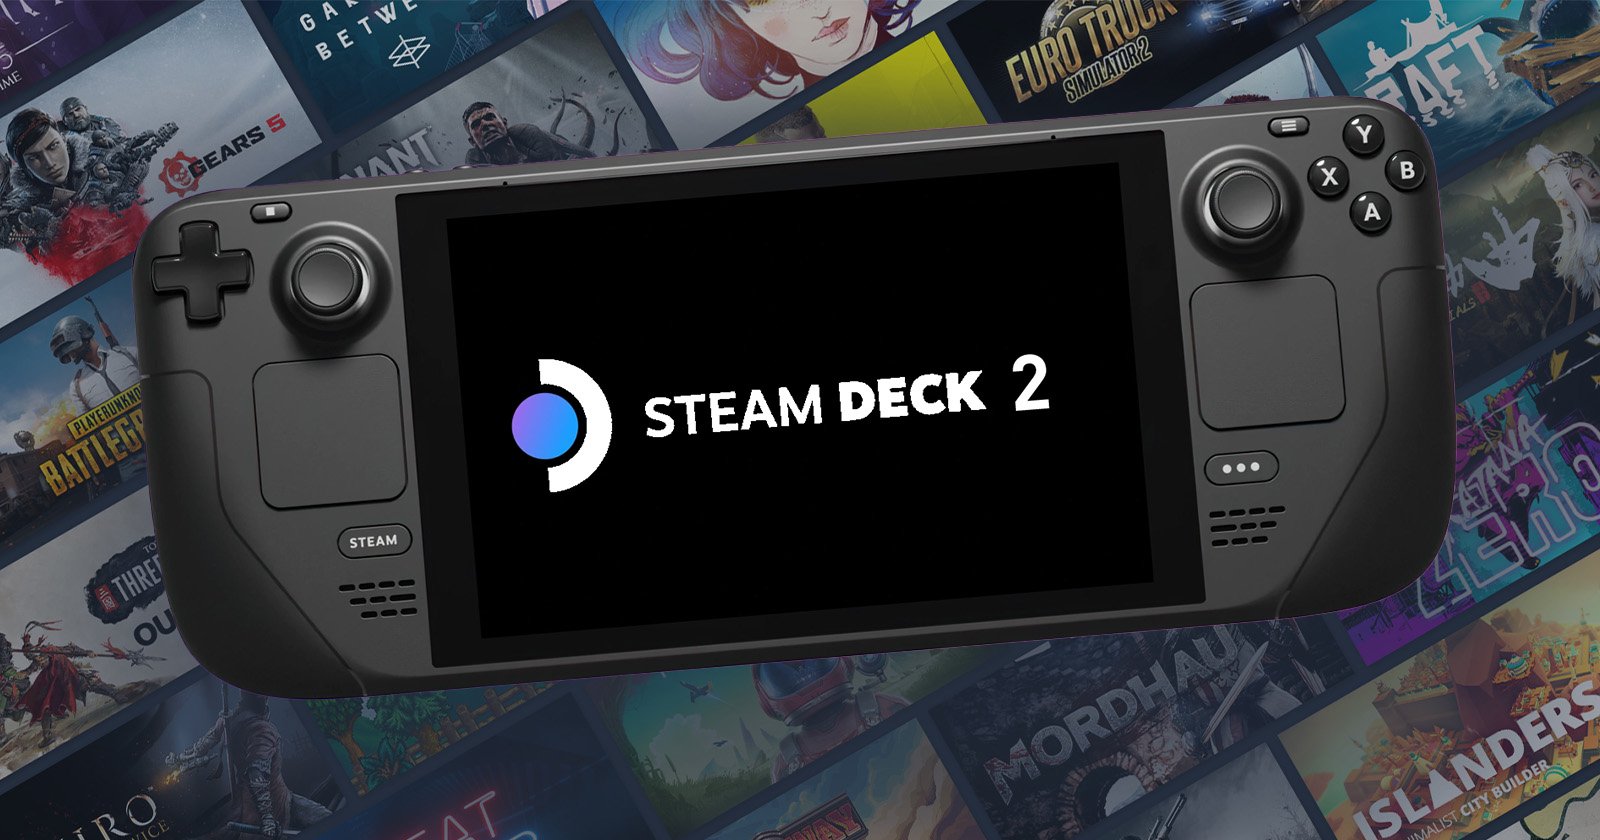 Don't expect Valve to launch the Steam Deck 2 anytime soon - The Tech Game